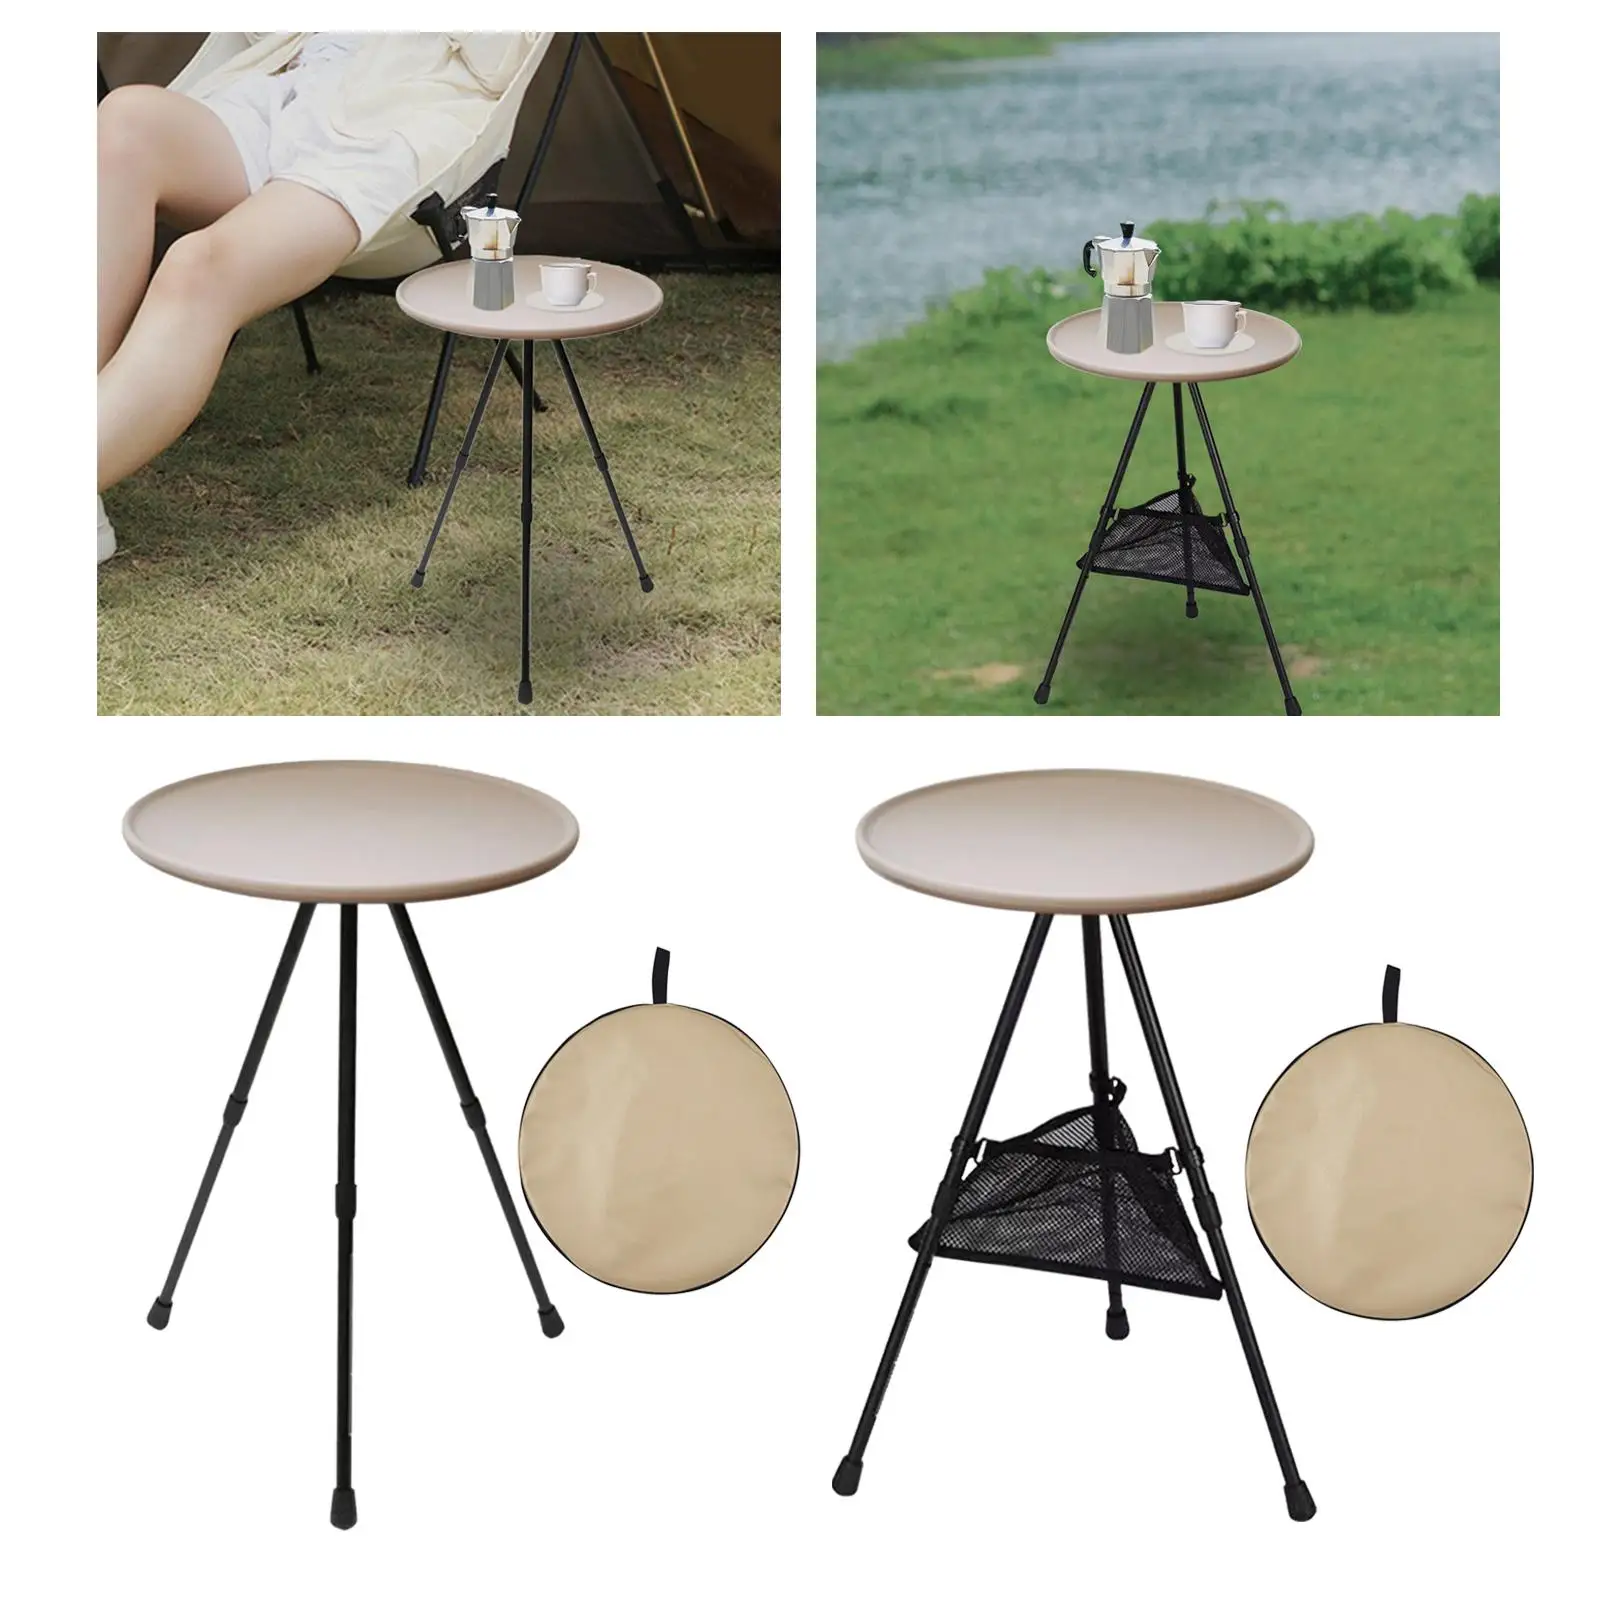 Outdoor Folding Round Table Portable Tea Coffee Camping Table Foldable Picnic Table for Hiking Picnic Travel Garden Climbing